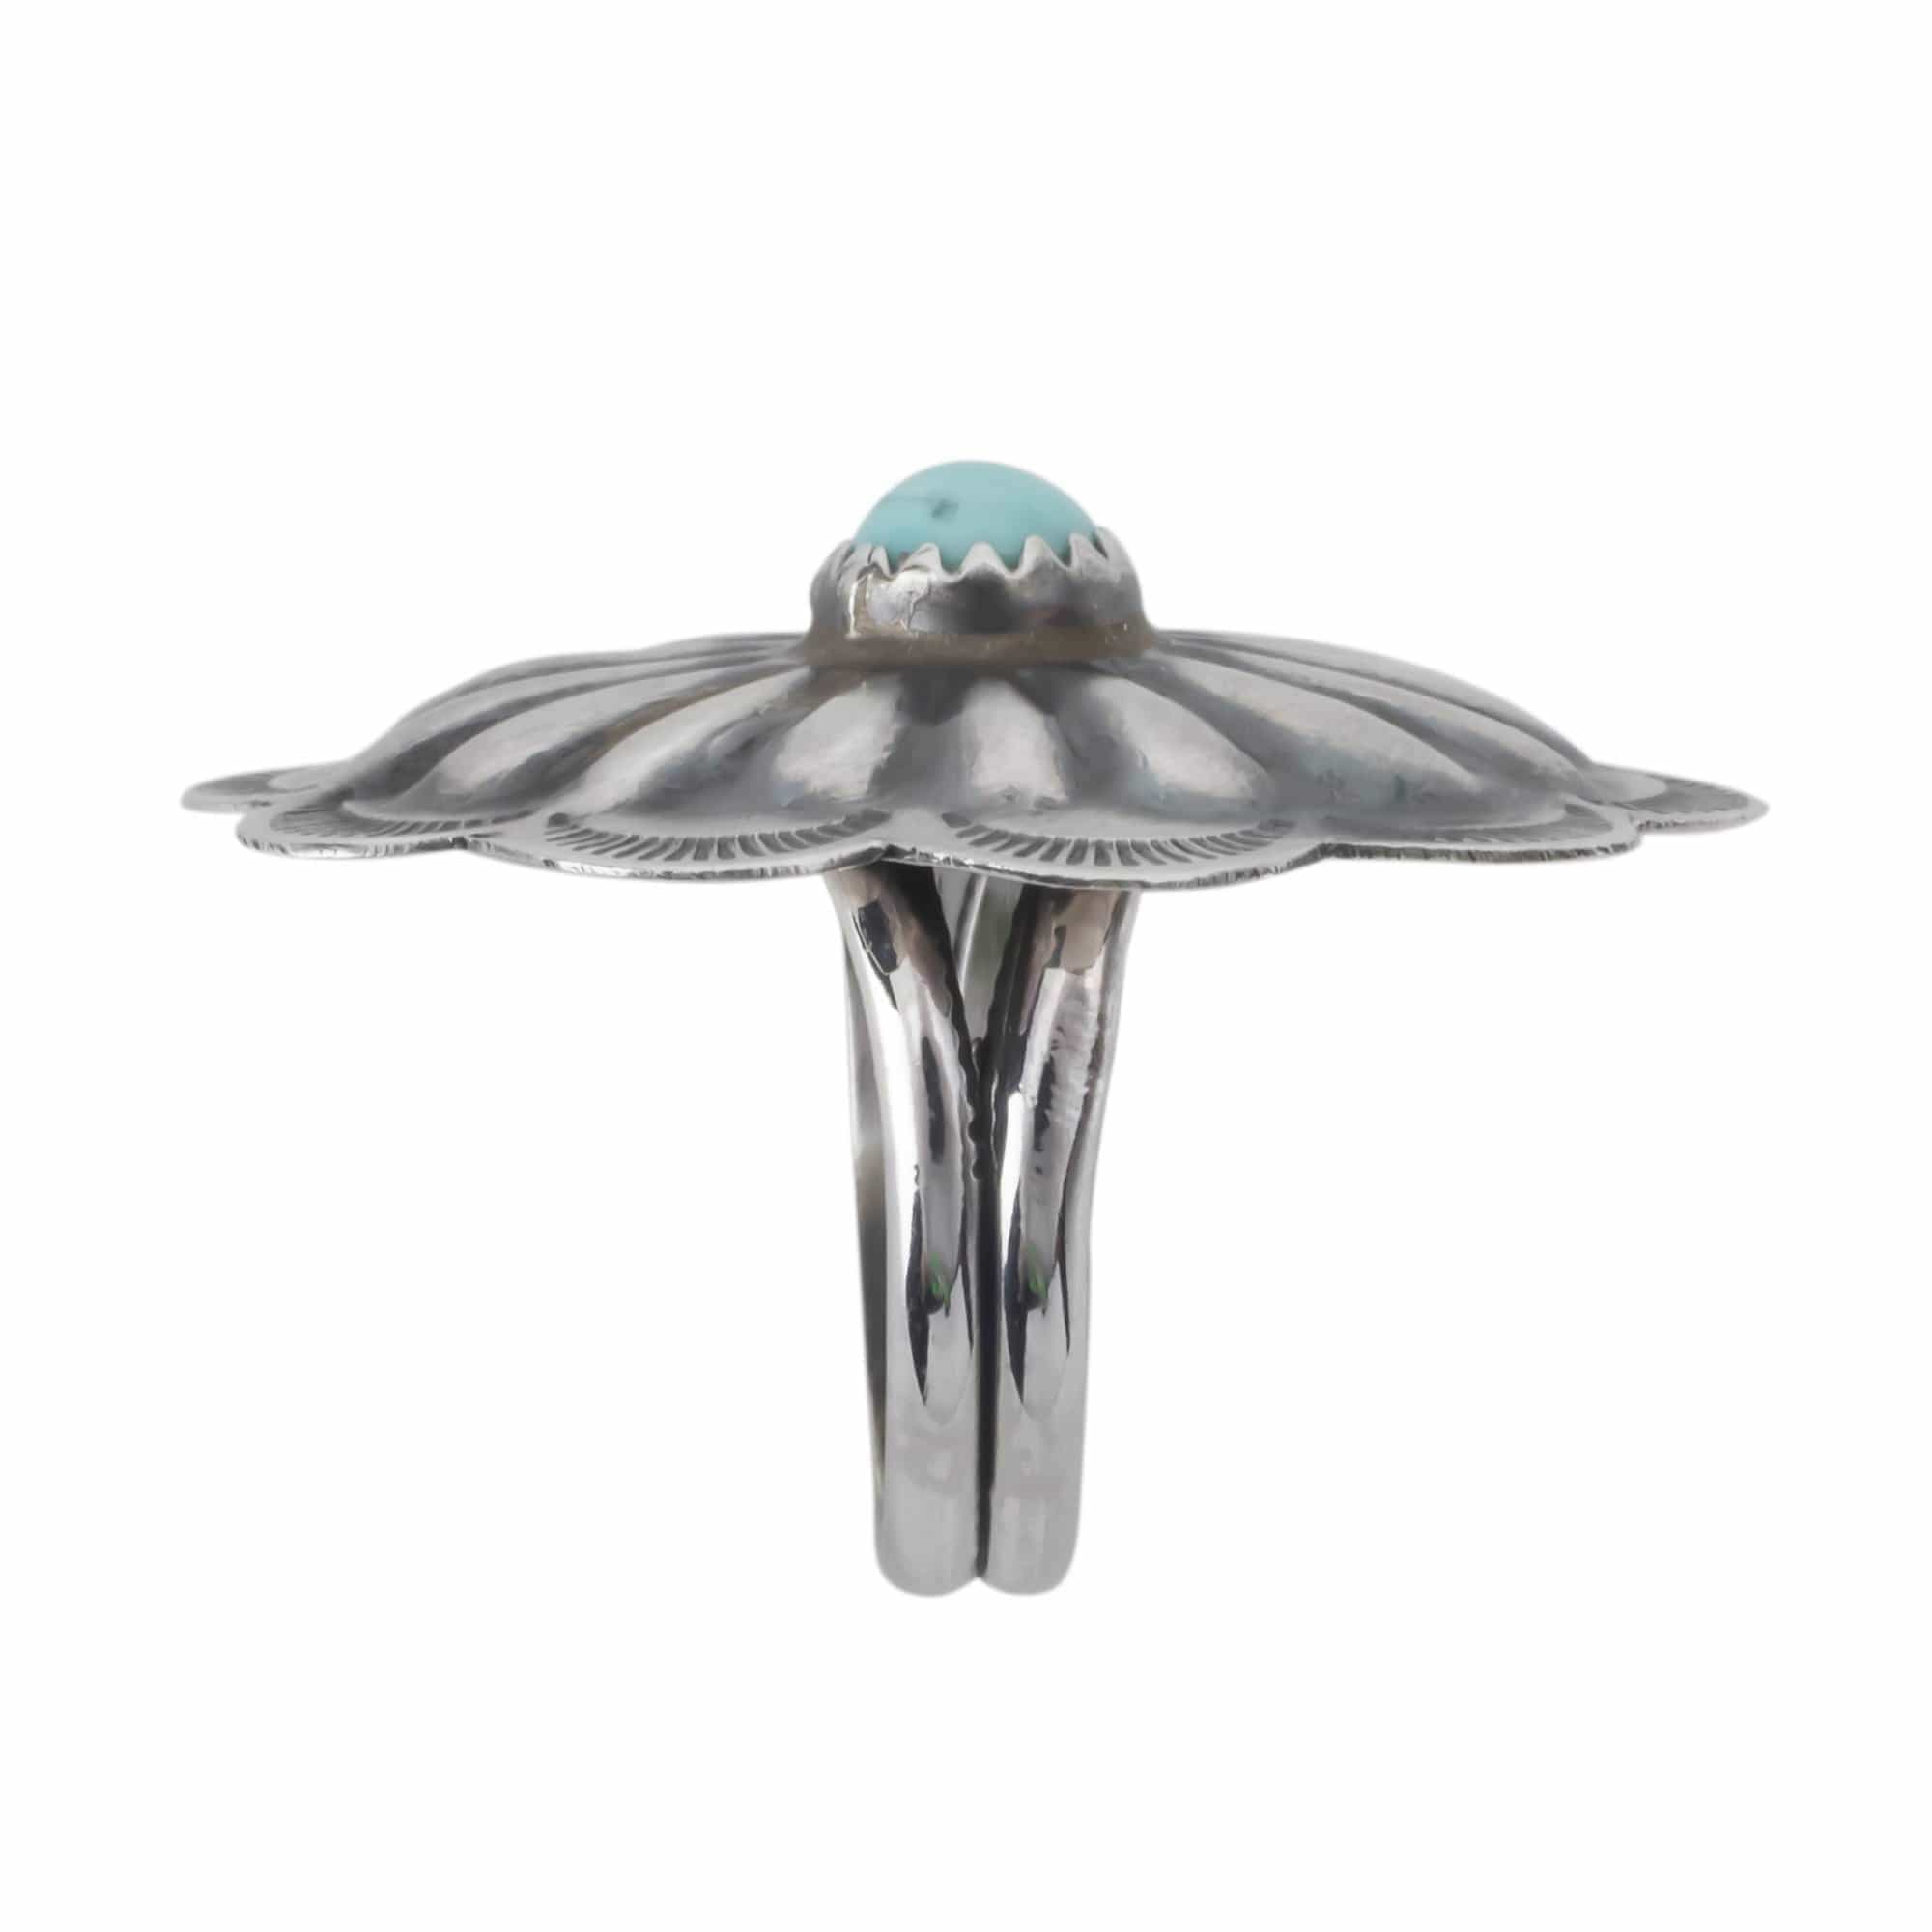 Kalifano Native American Jewelry Joann Begay Turquoise Native American Made Sterling Silver Ring